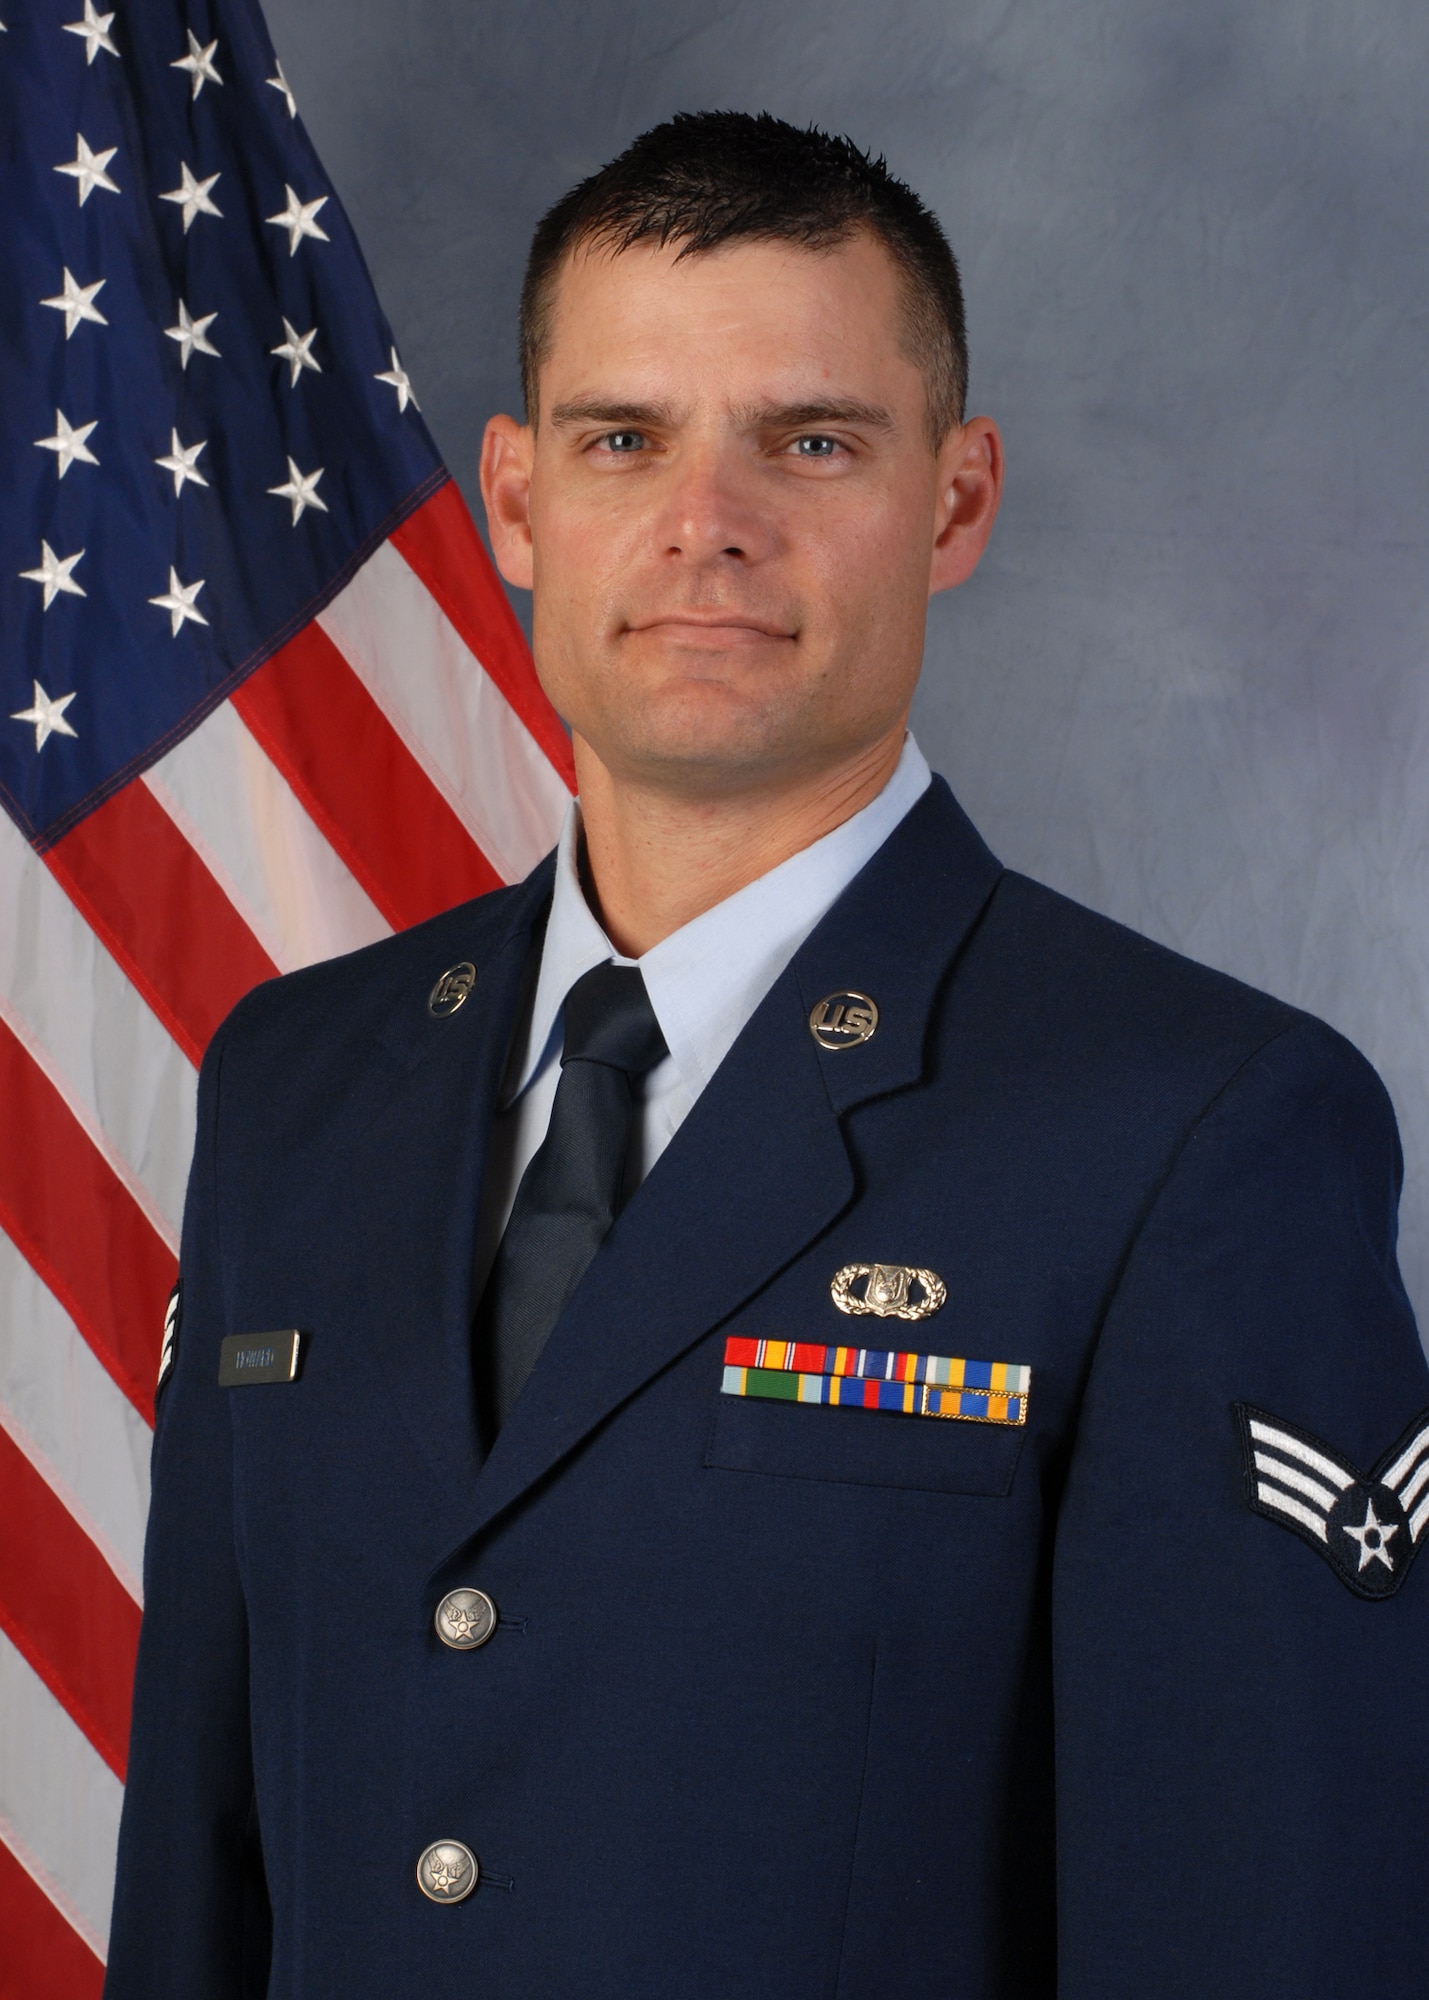 Senior Airman Thomas Howard, 173rd Operations Group, was selected as the 2013 Airman of the Year Category I for the 173rd Fighter Wing.  (U.S. Air National Guard photo by Tech. Sgt. Jefferson Thompson, released)